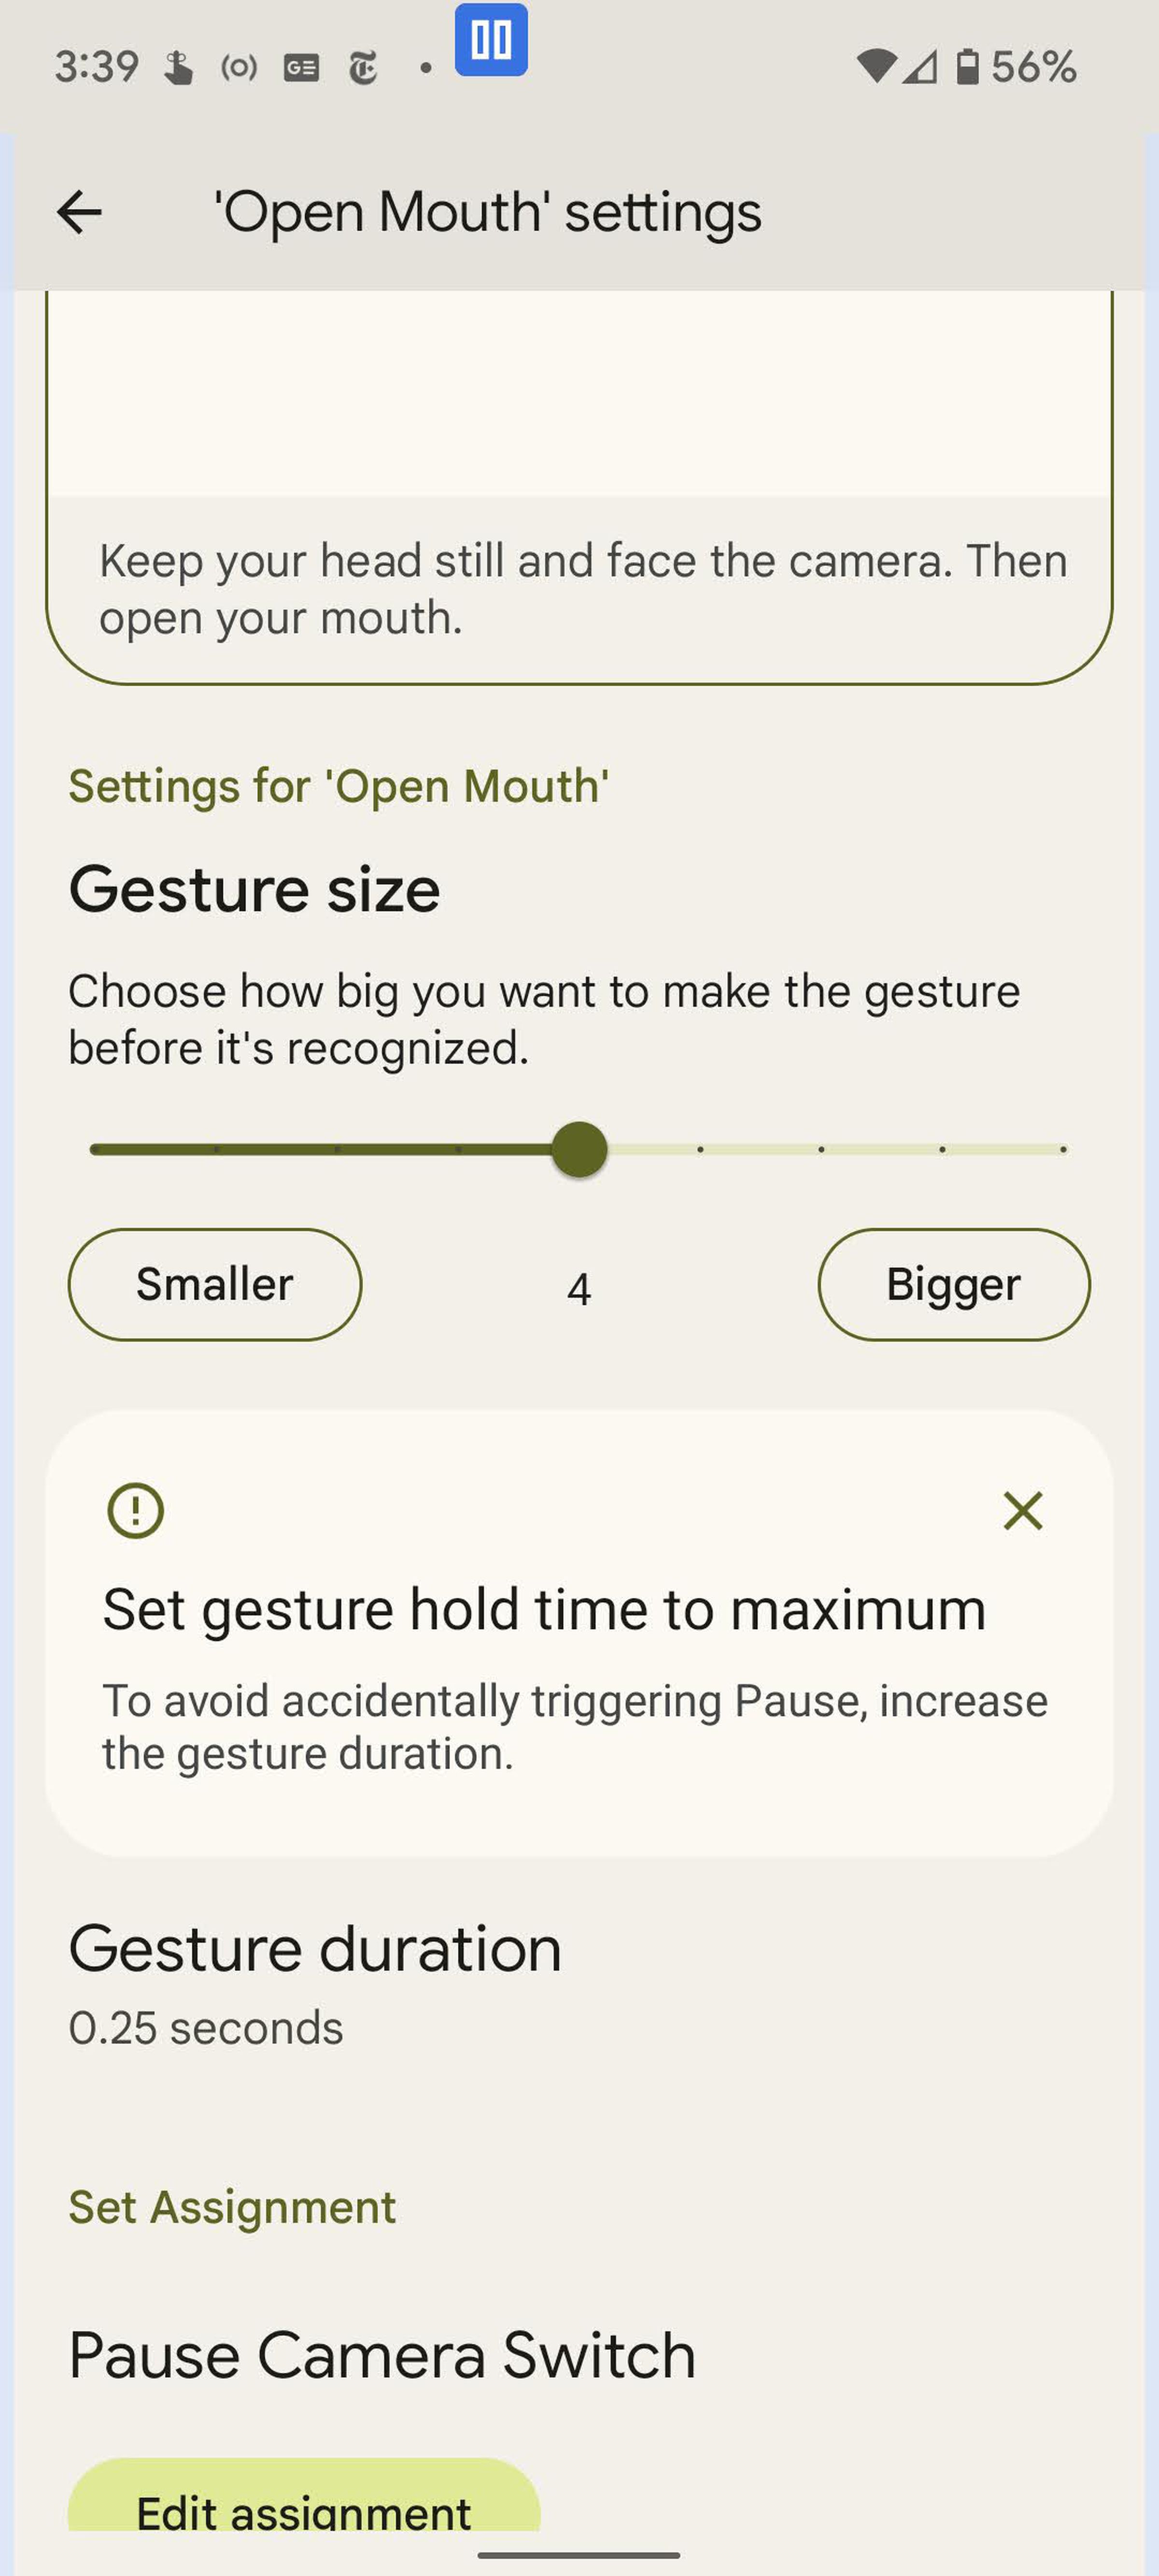 You can set the duration of each gesture.